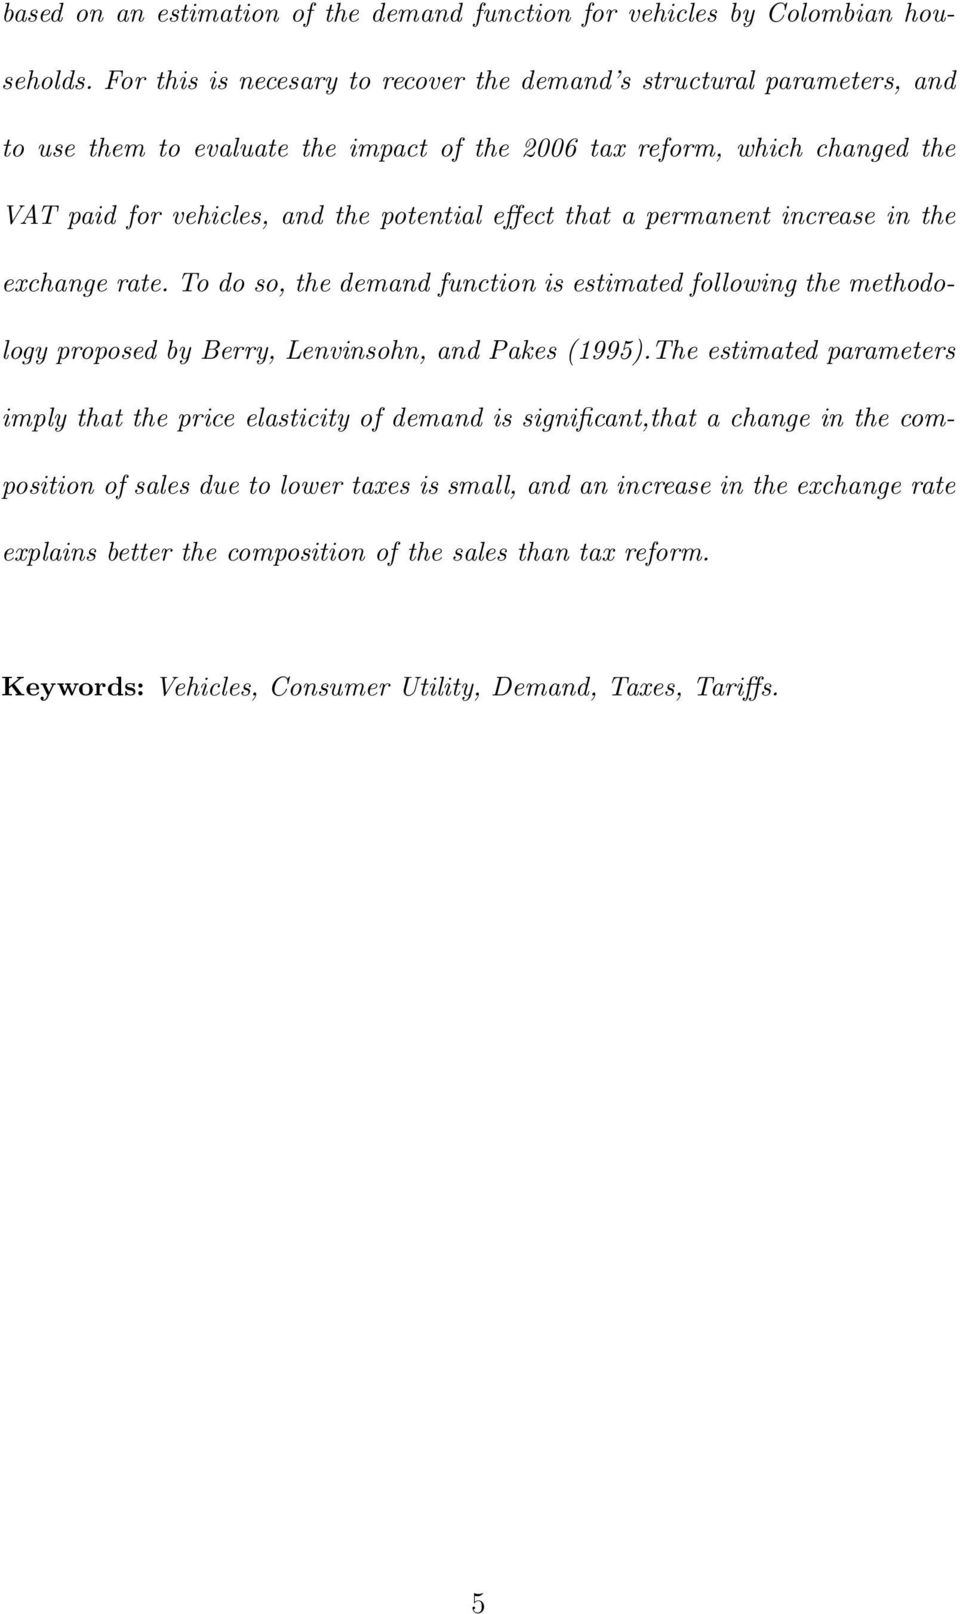 effect that a permanent increase in the exchange rate. To do so, the demand function is estimated following the methodology proposed by Berry, Lenvinsohn, and Pakes (1995).